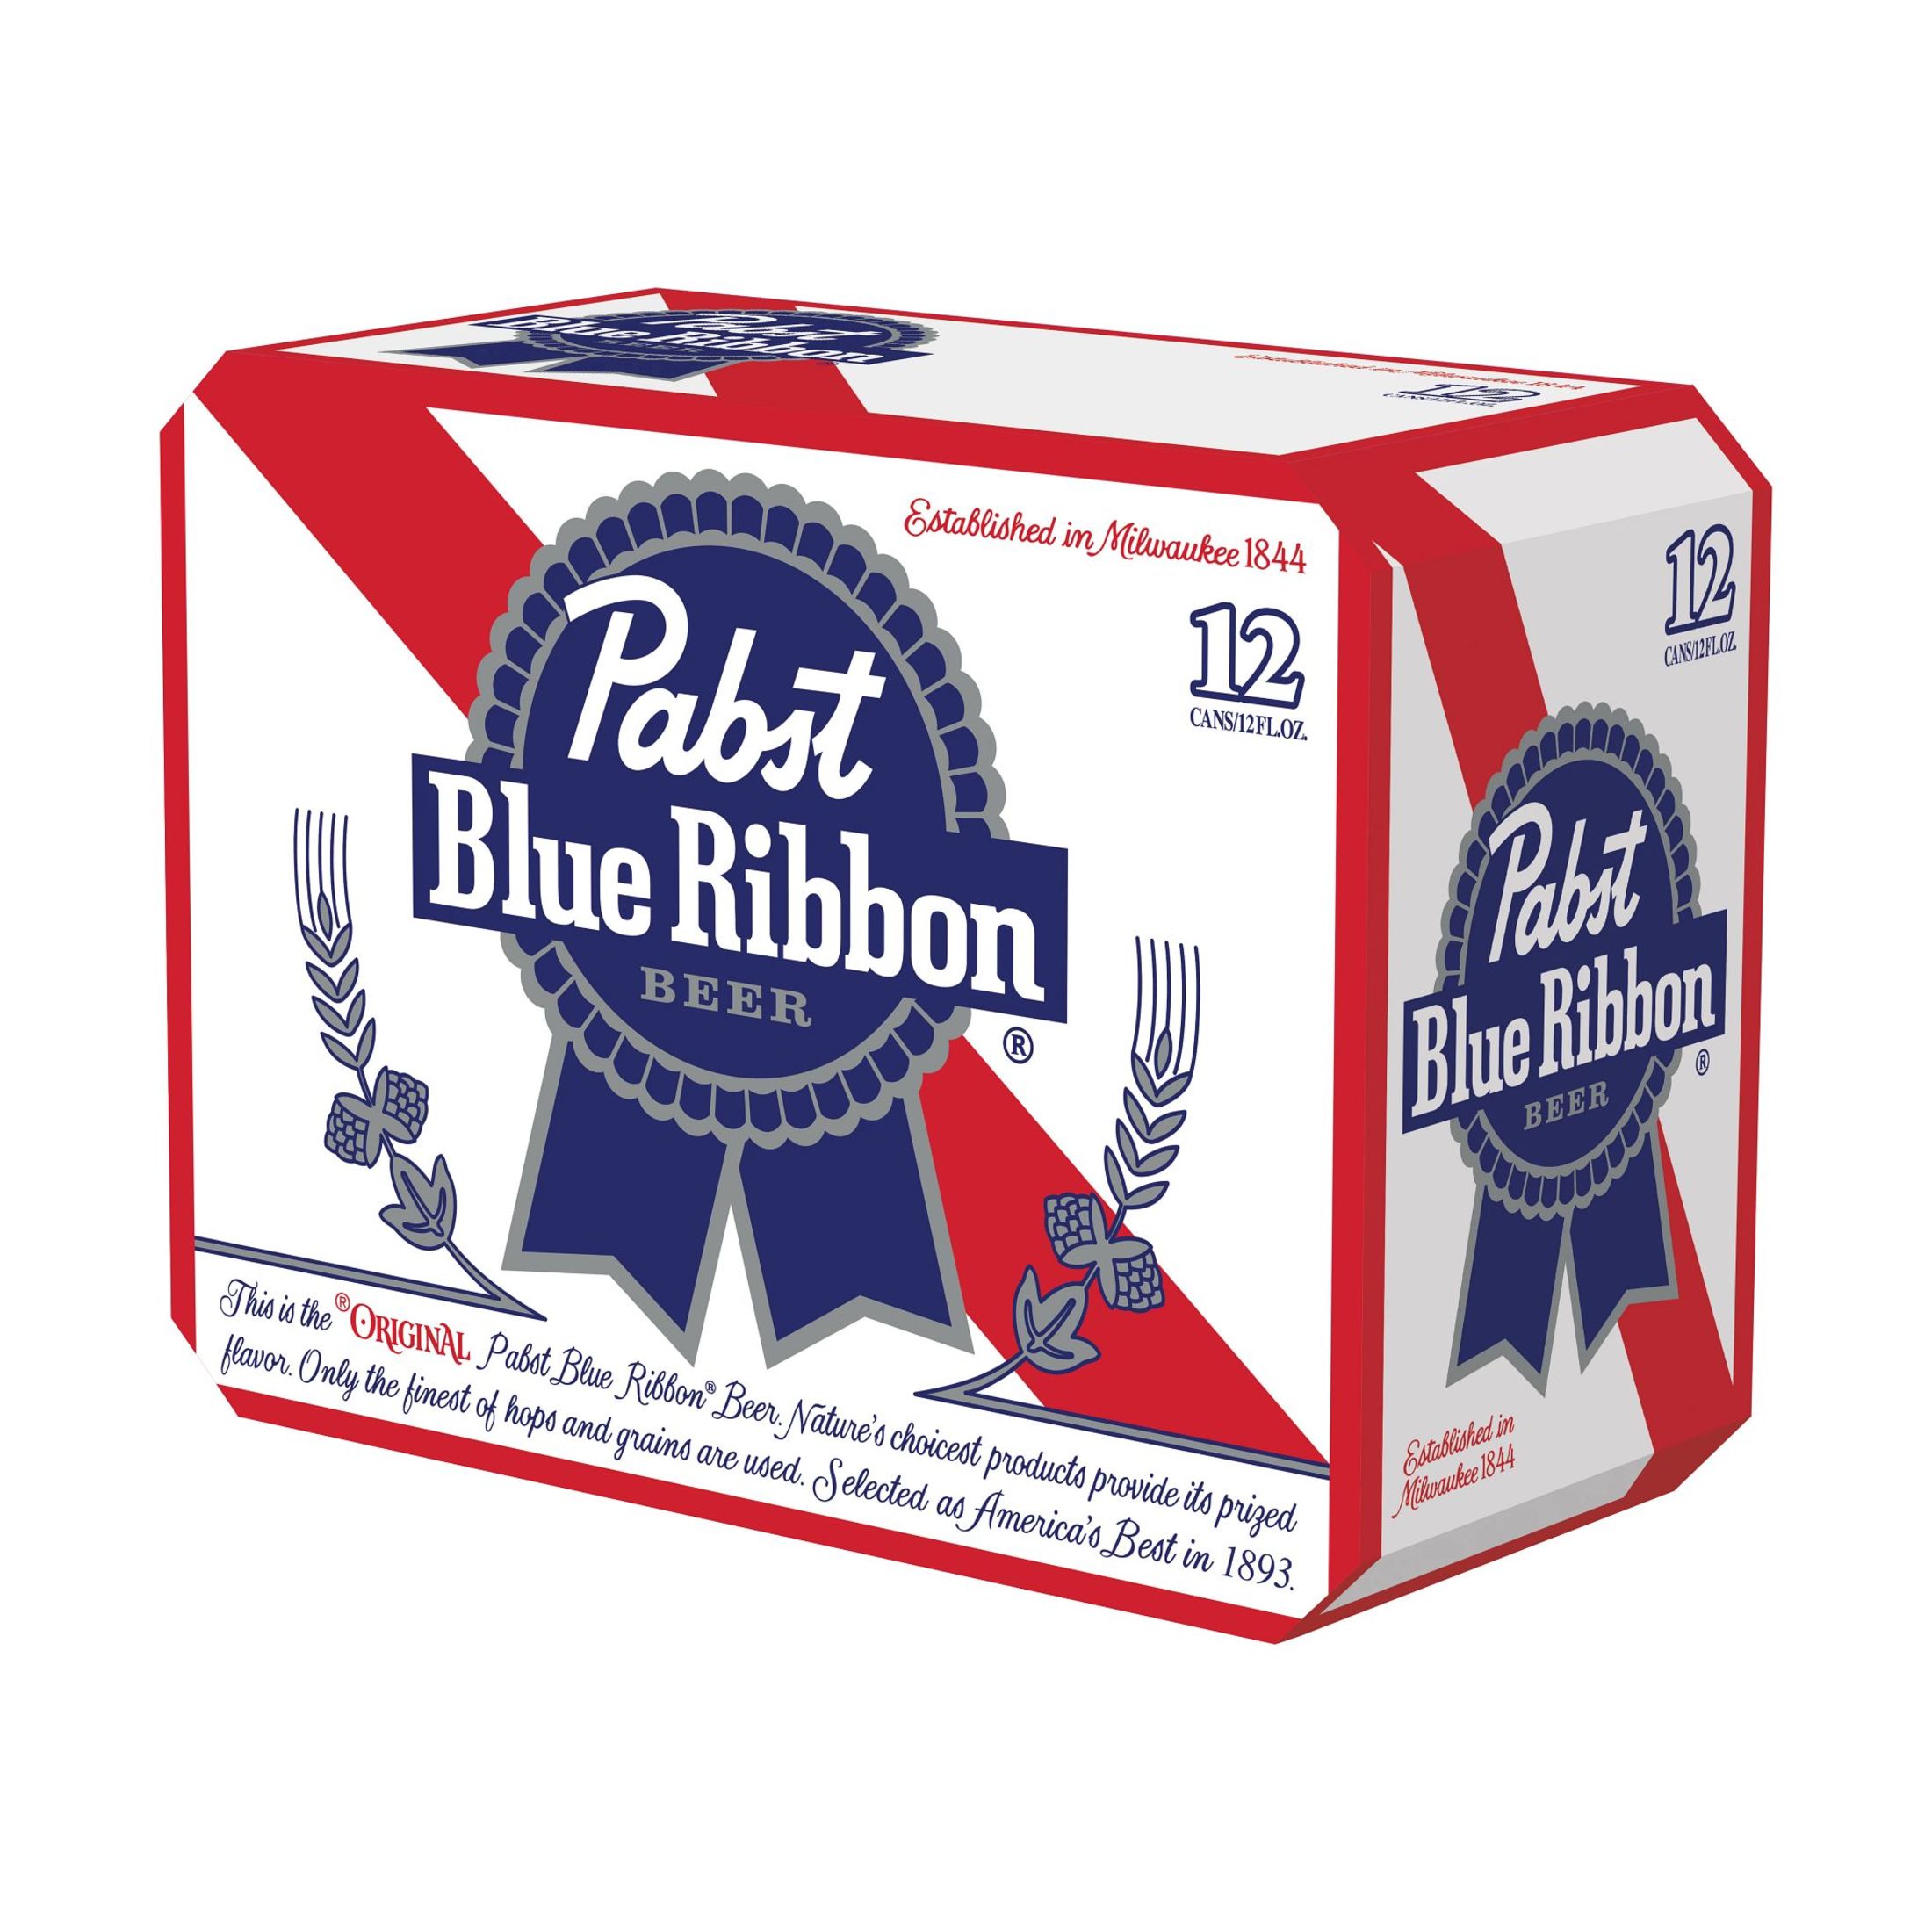 Pabst Blue Ribbon, Domestic Lager, 12 Pack, 12 fl oz Can, 3.9% ABV - image 4 of 12